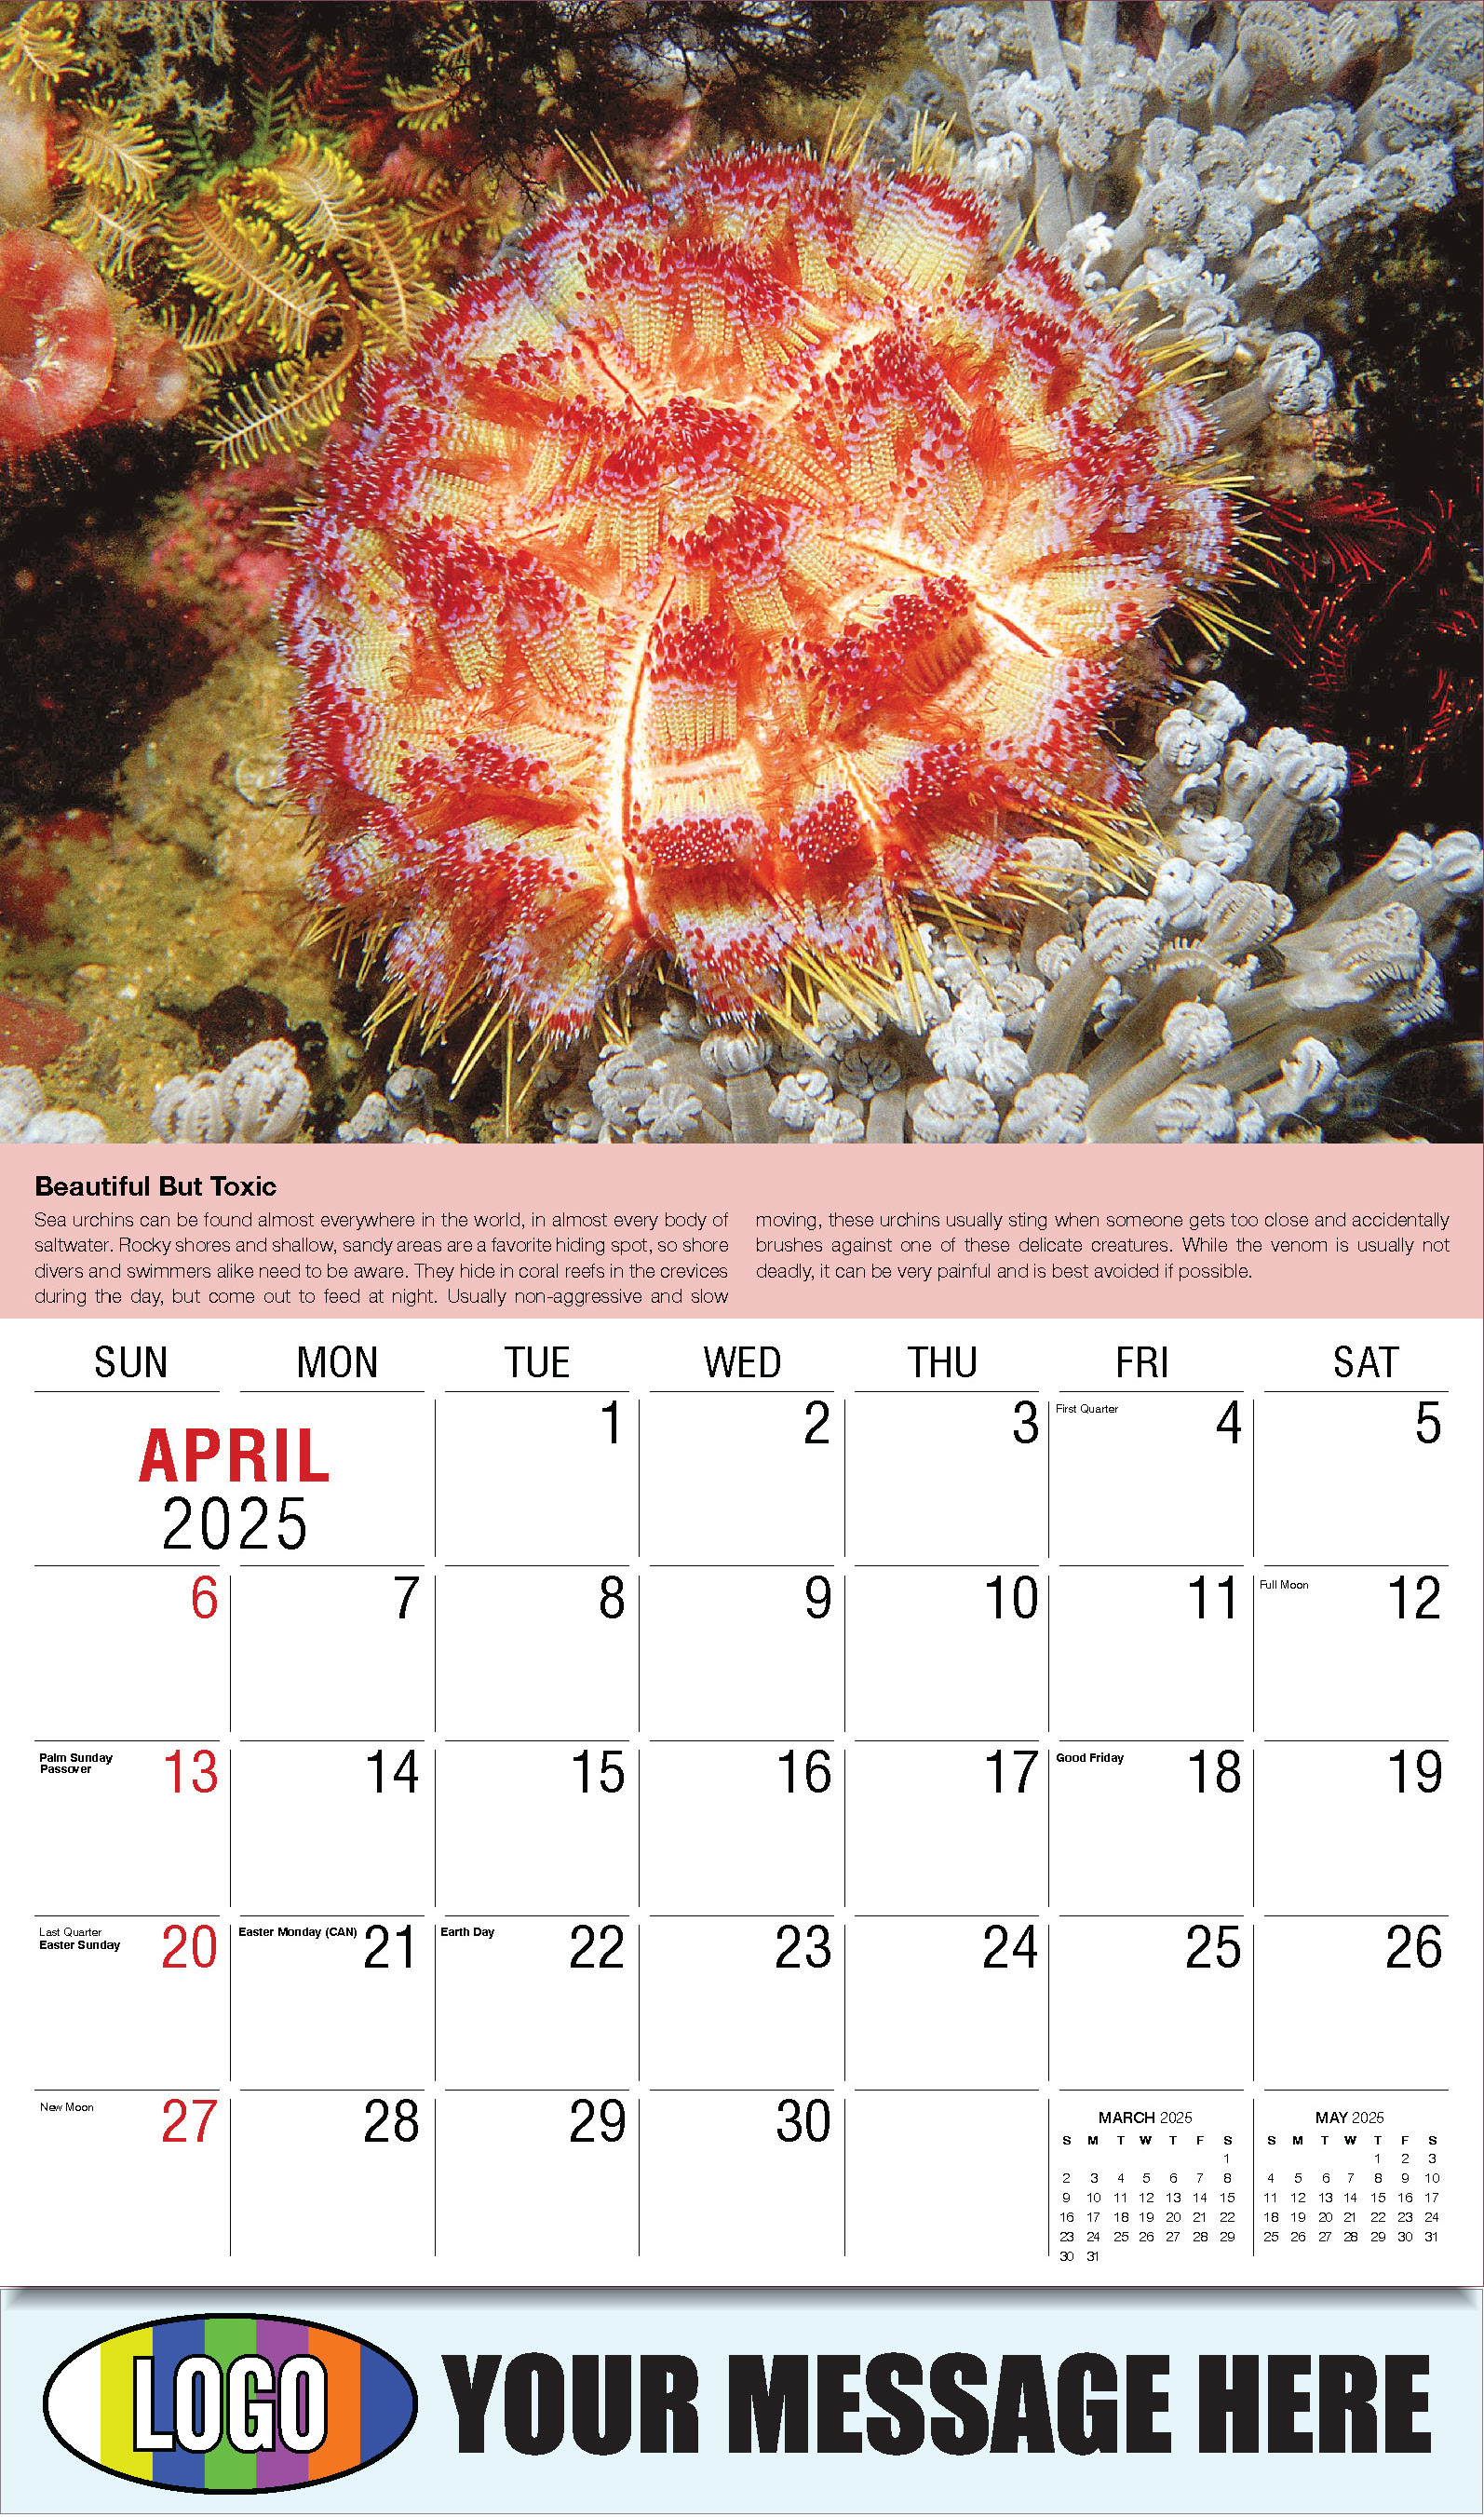 Planet Earth 2025 Business Promotional Wall Calendar - April